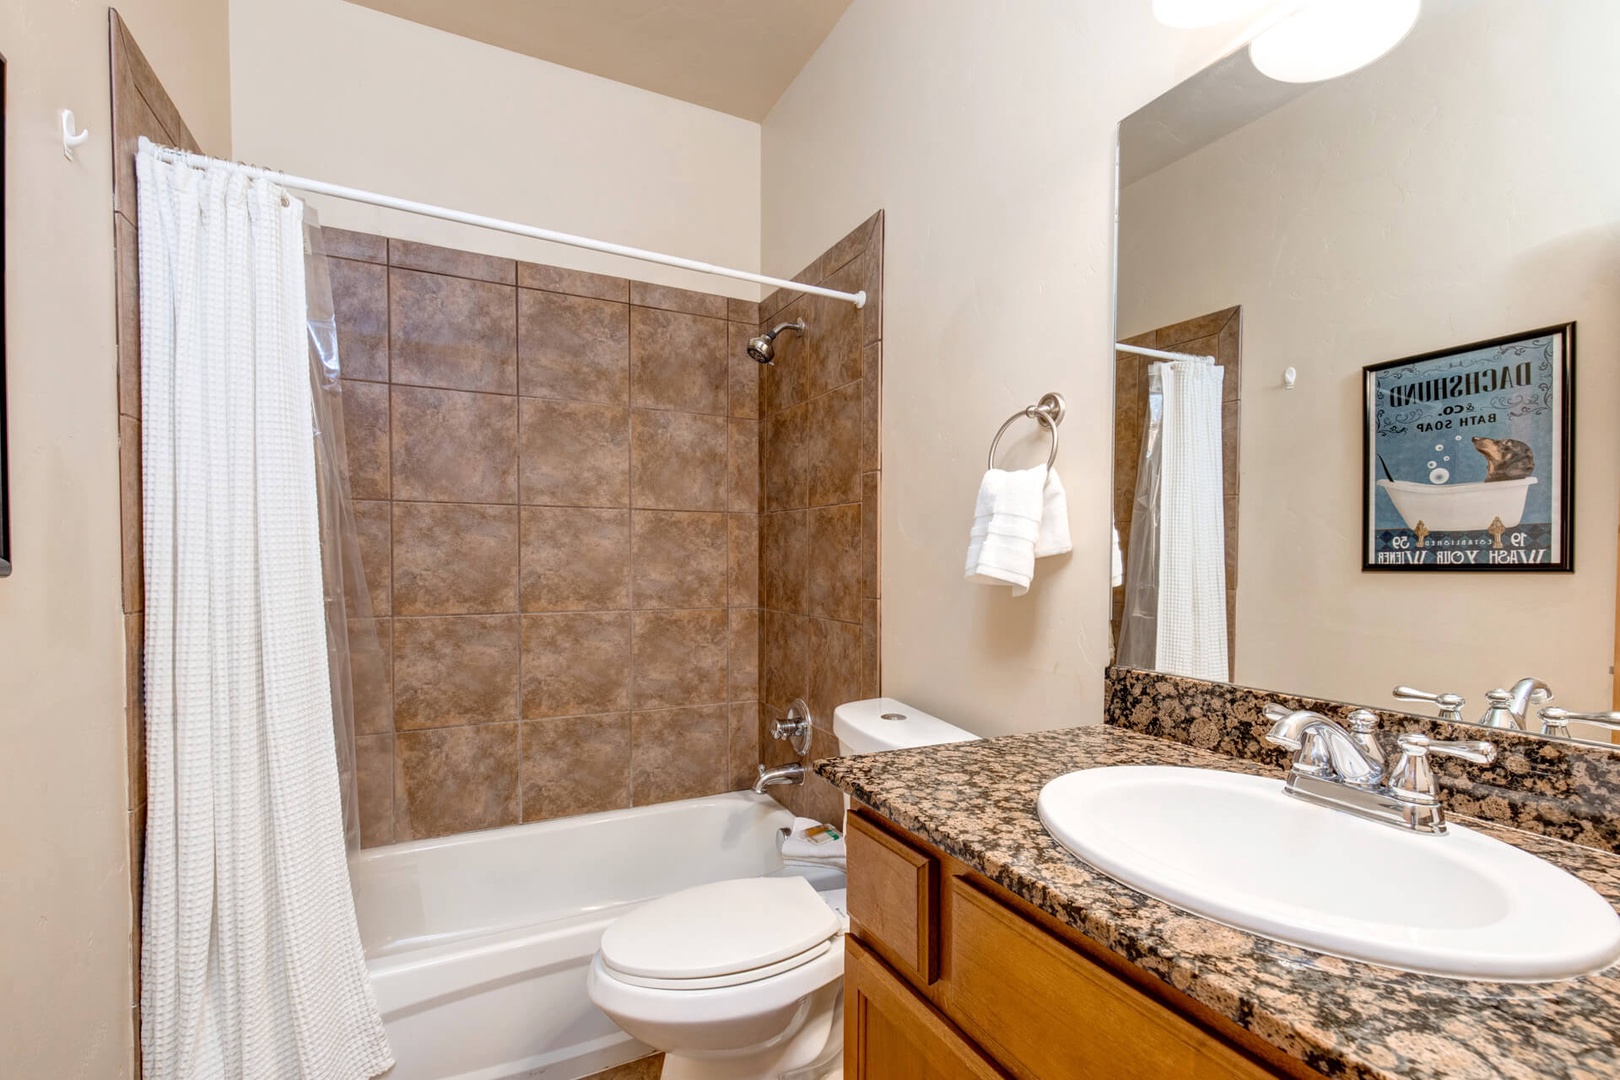 Bear Hollow Lodges 1104: The second bathroom accommodates your guests.  It is a full bathroom shared between the two guest bedrooms rooms, appointed with a tub/shower combo, large vanity and sink.